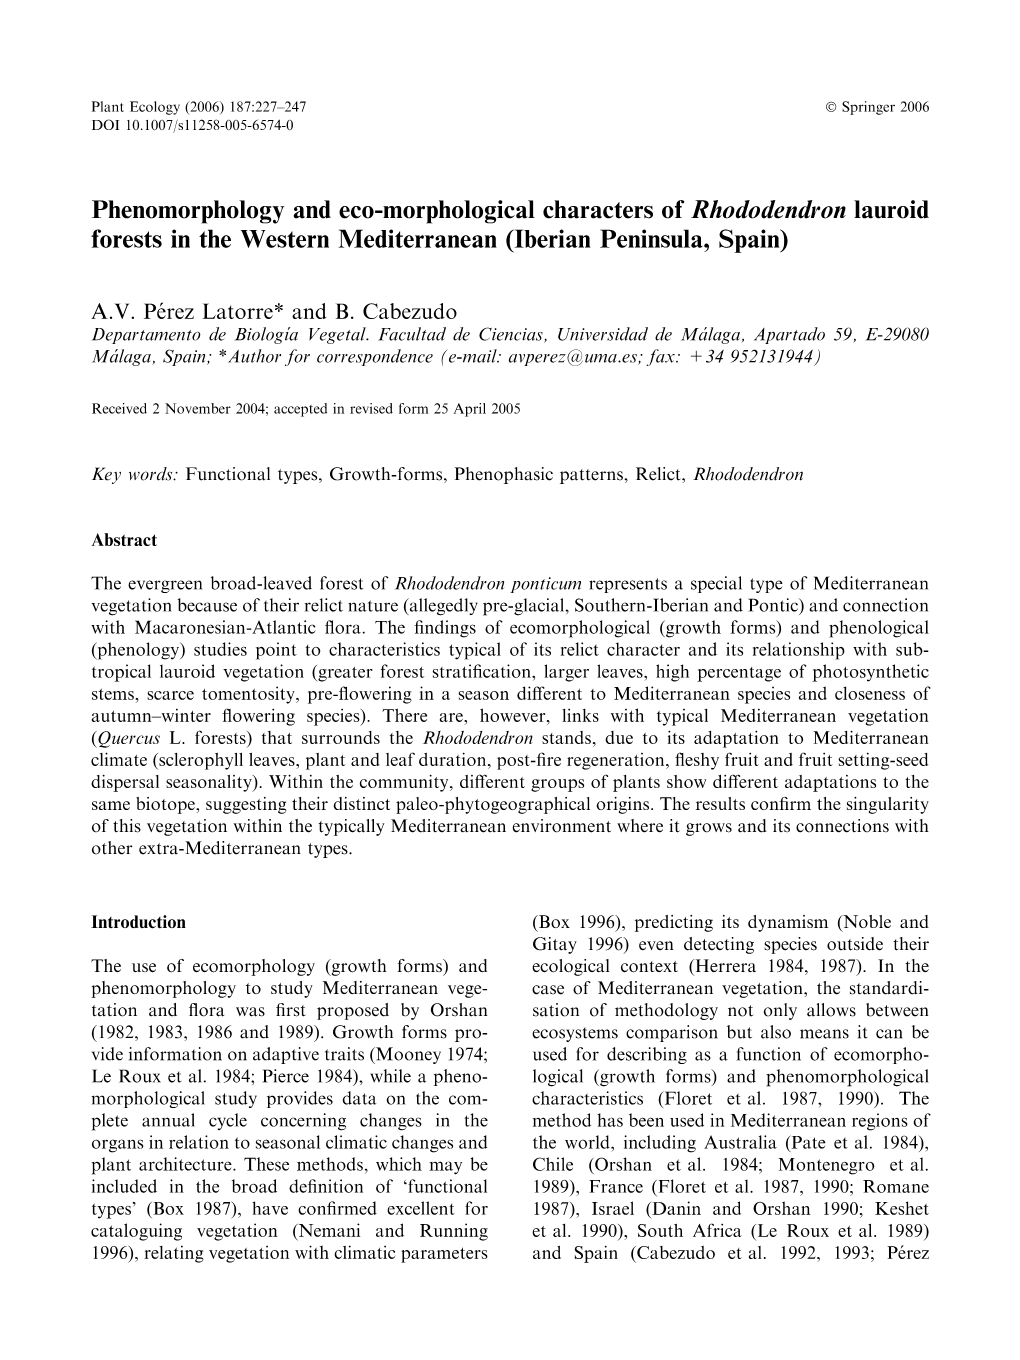 Phenomorphology and Eco-Morphological Characters of Rhododendron Lauroid Forests in the Western Mediterranean (Iberian Peninsula, Spain)